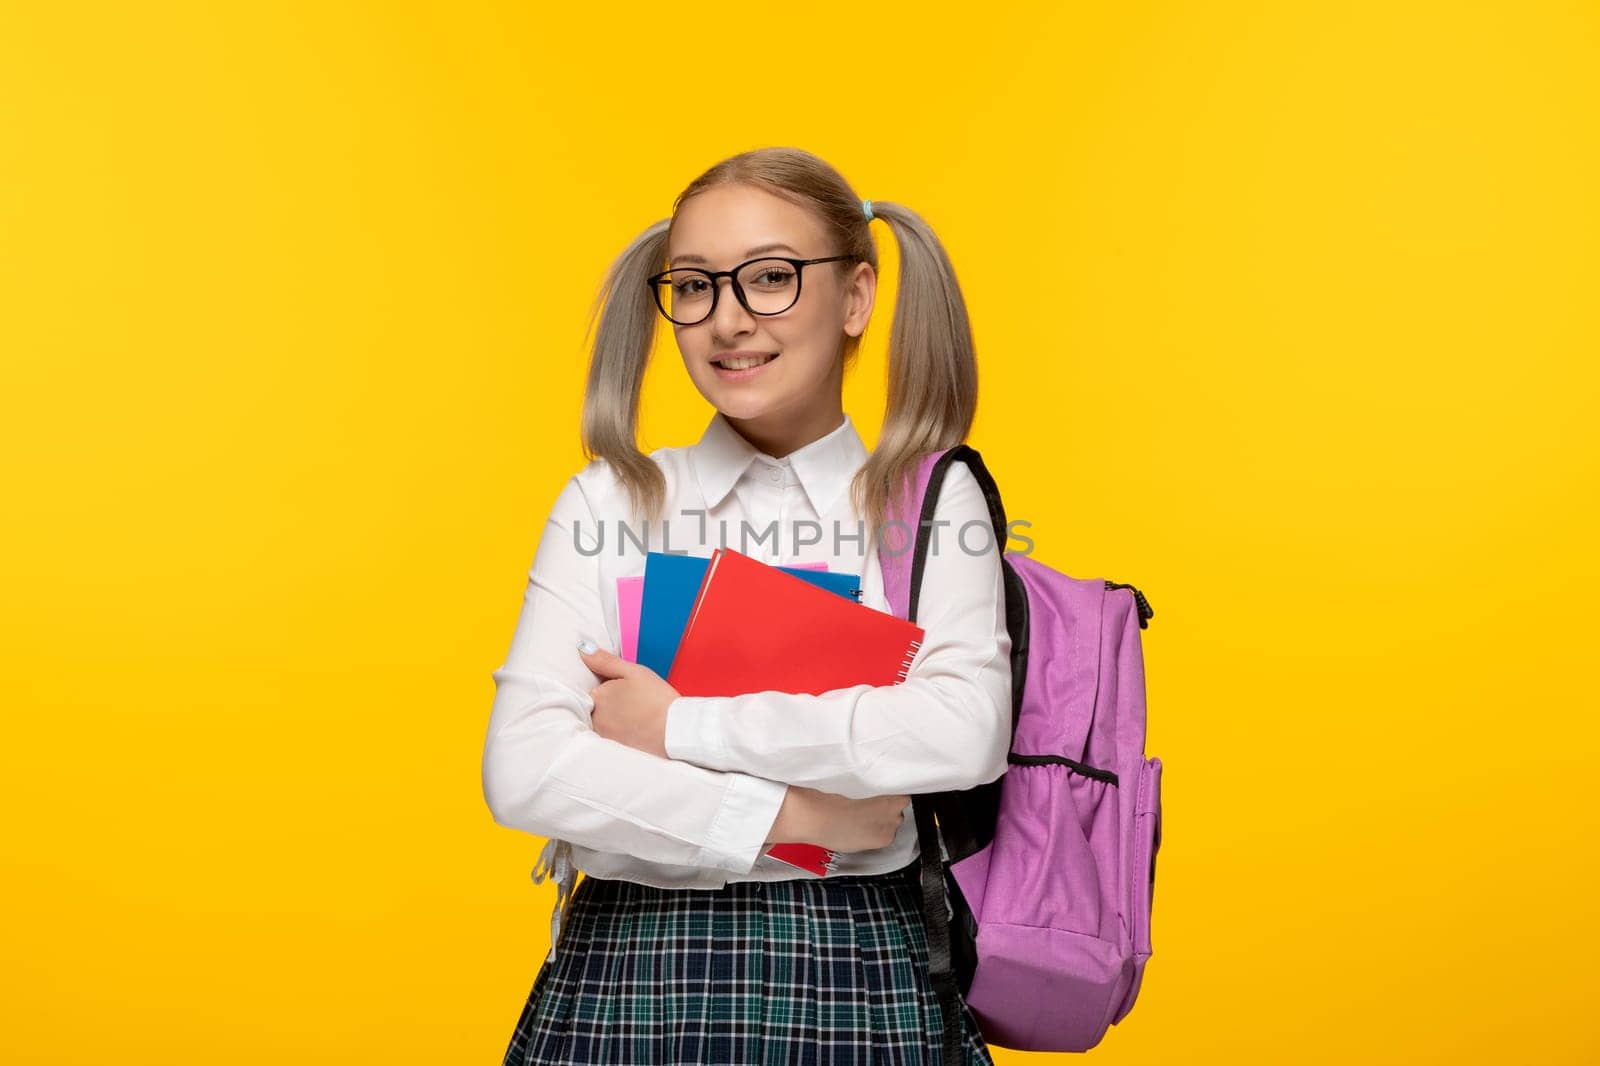 world book day blonde school girl is holding colorful notebooks on yellow background